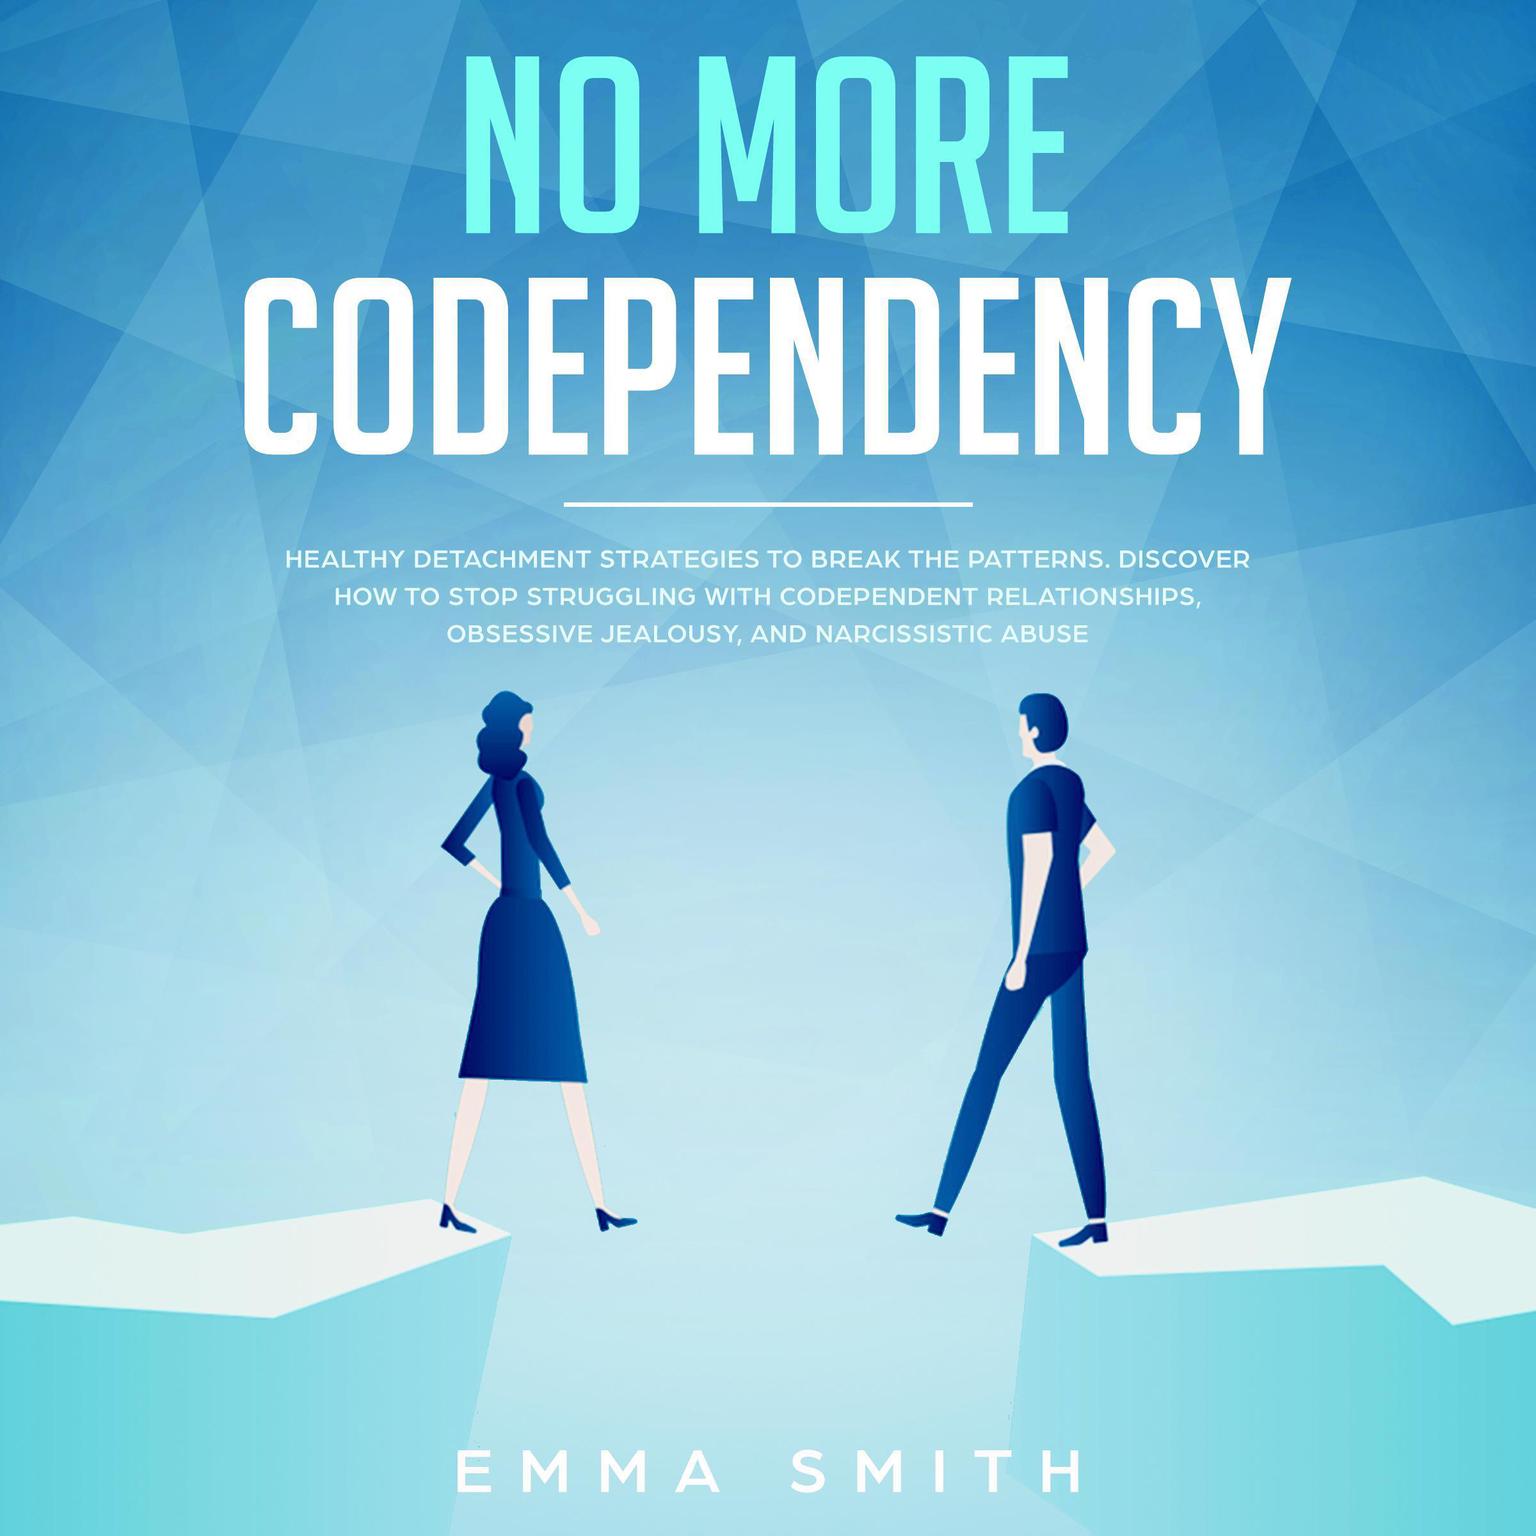 No More Codependency: Healthy Detachment Strategies to Break the Patterns, Discover How to Stop Struggling with Codependent Relationships, Obsessive Jealousy and Narcissistic Abuse  Audiobook, by Emma Smith